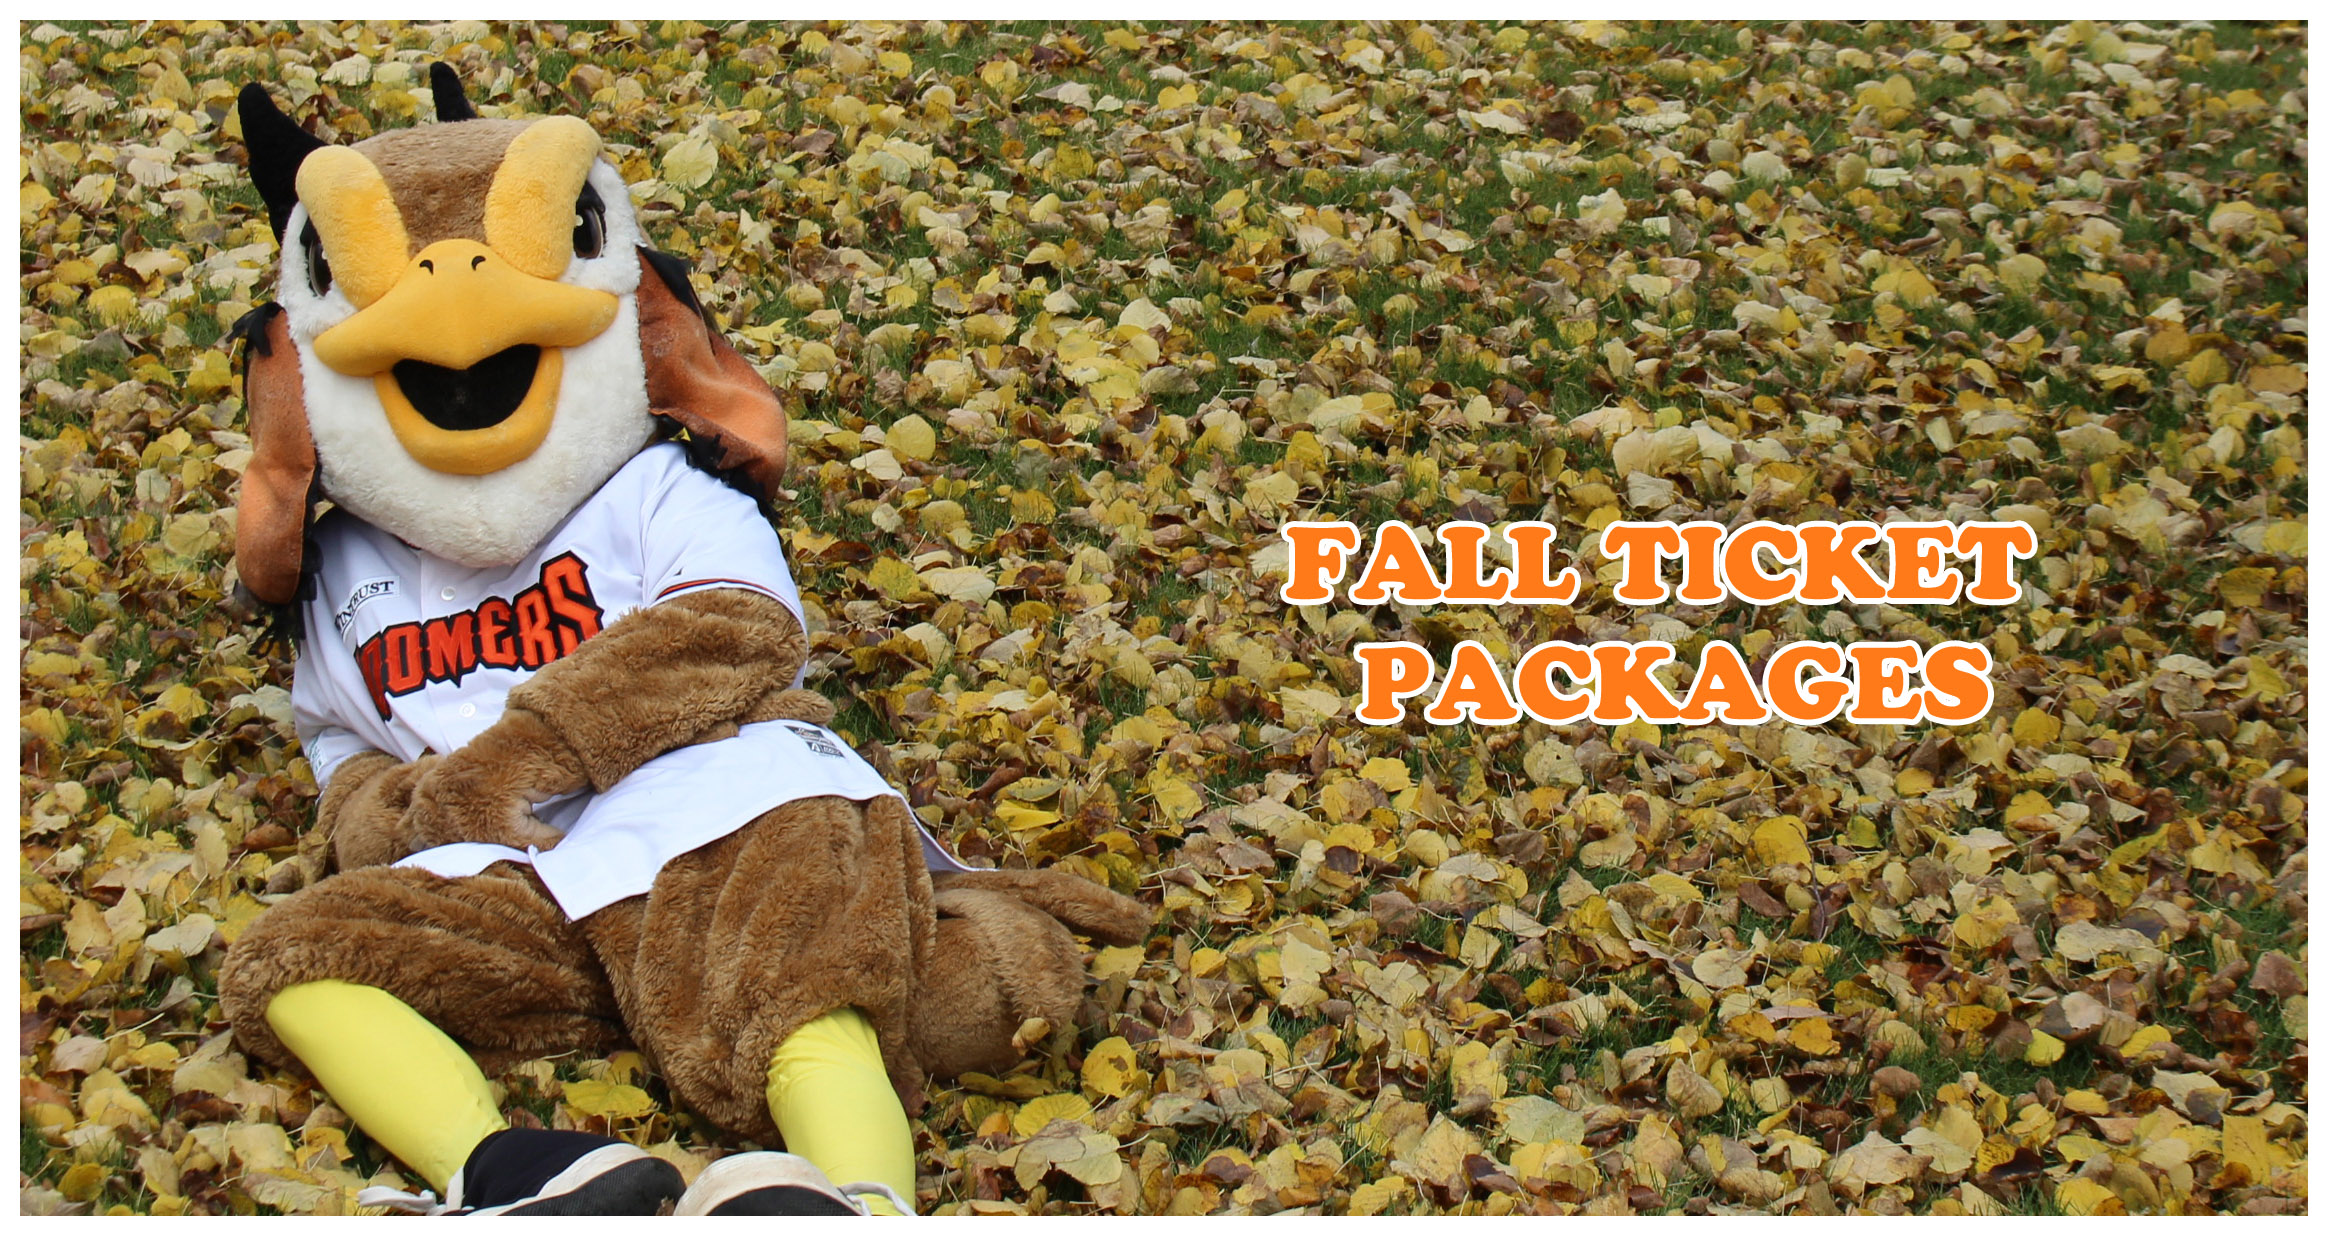 Fall Ticket Packages On Sale Now!